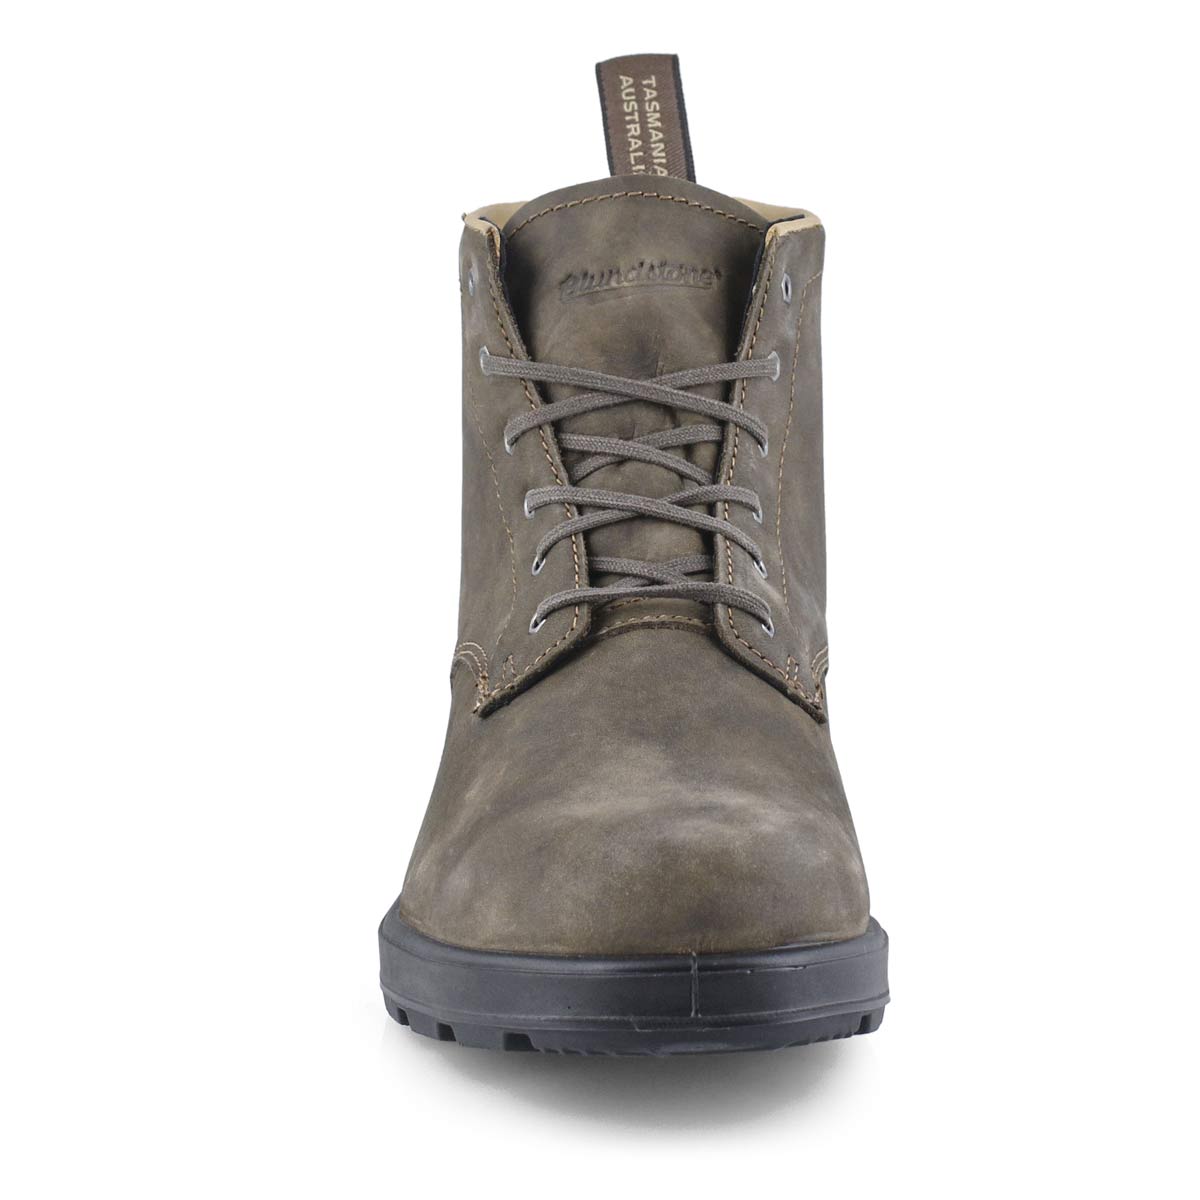 blundstone lace up boots review